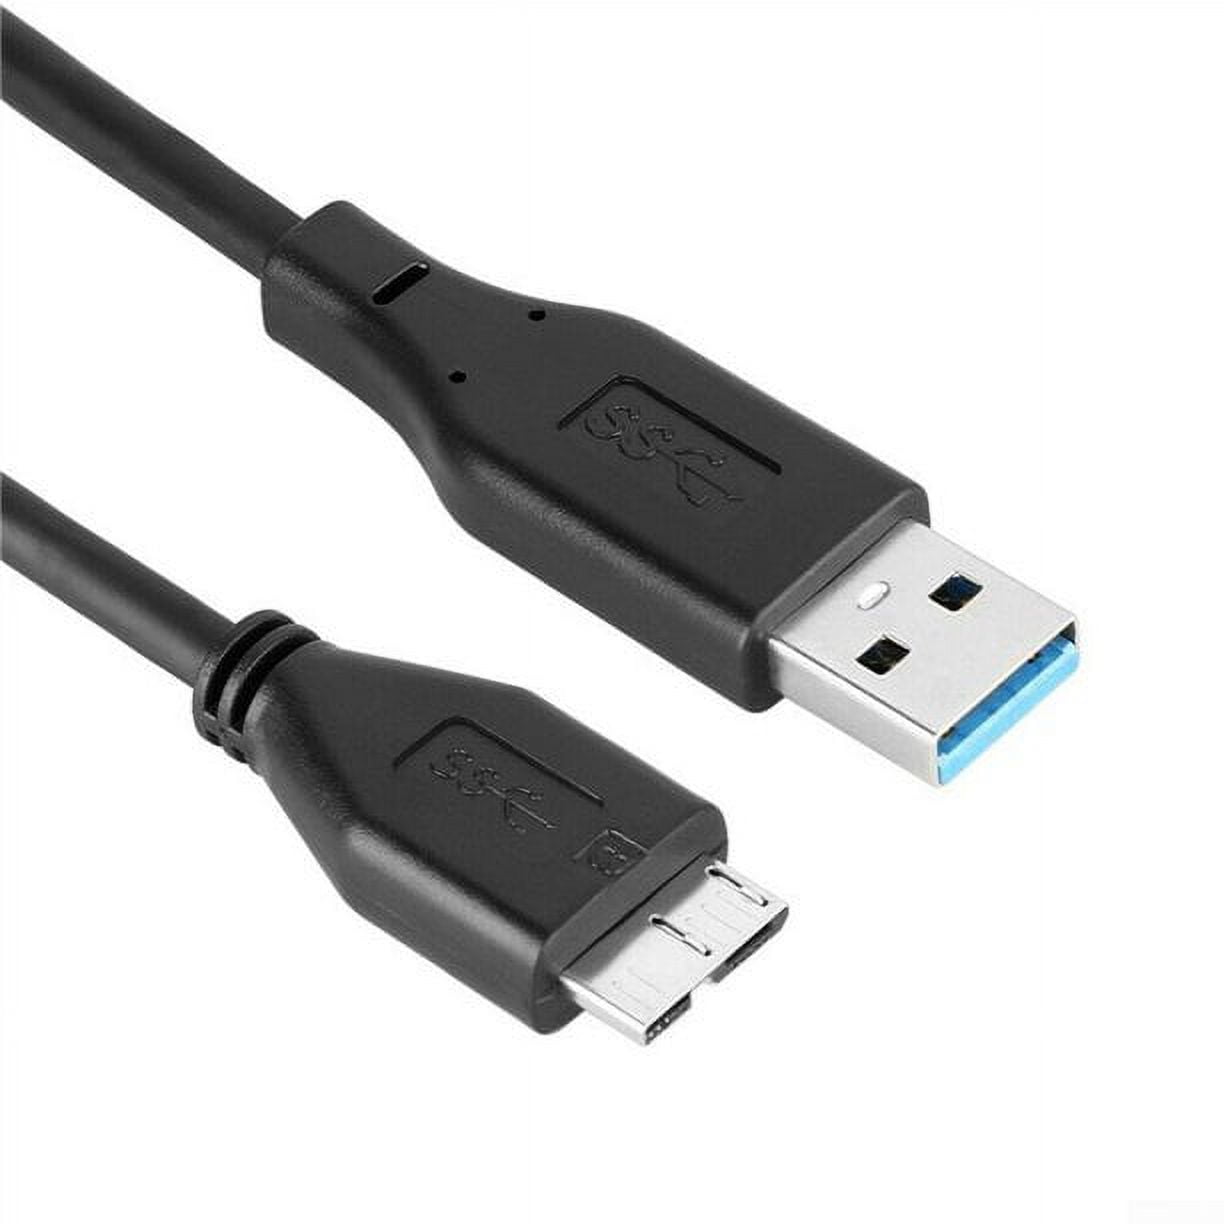 USB3.0 Data Cable for samsung External Hard Drive Disk S3 Portable 3.0(1TB)  GM